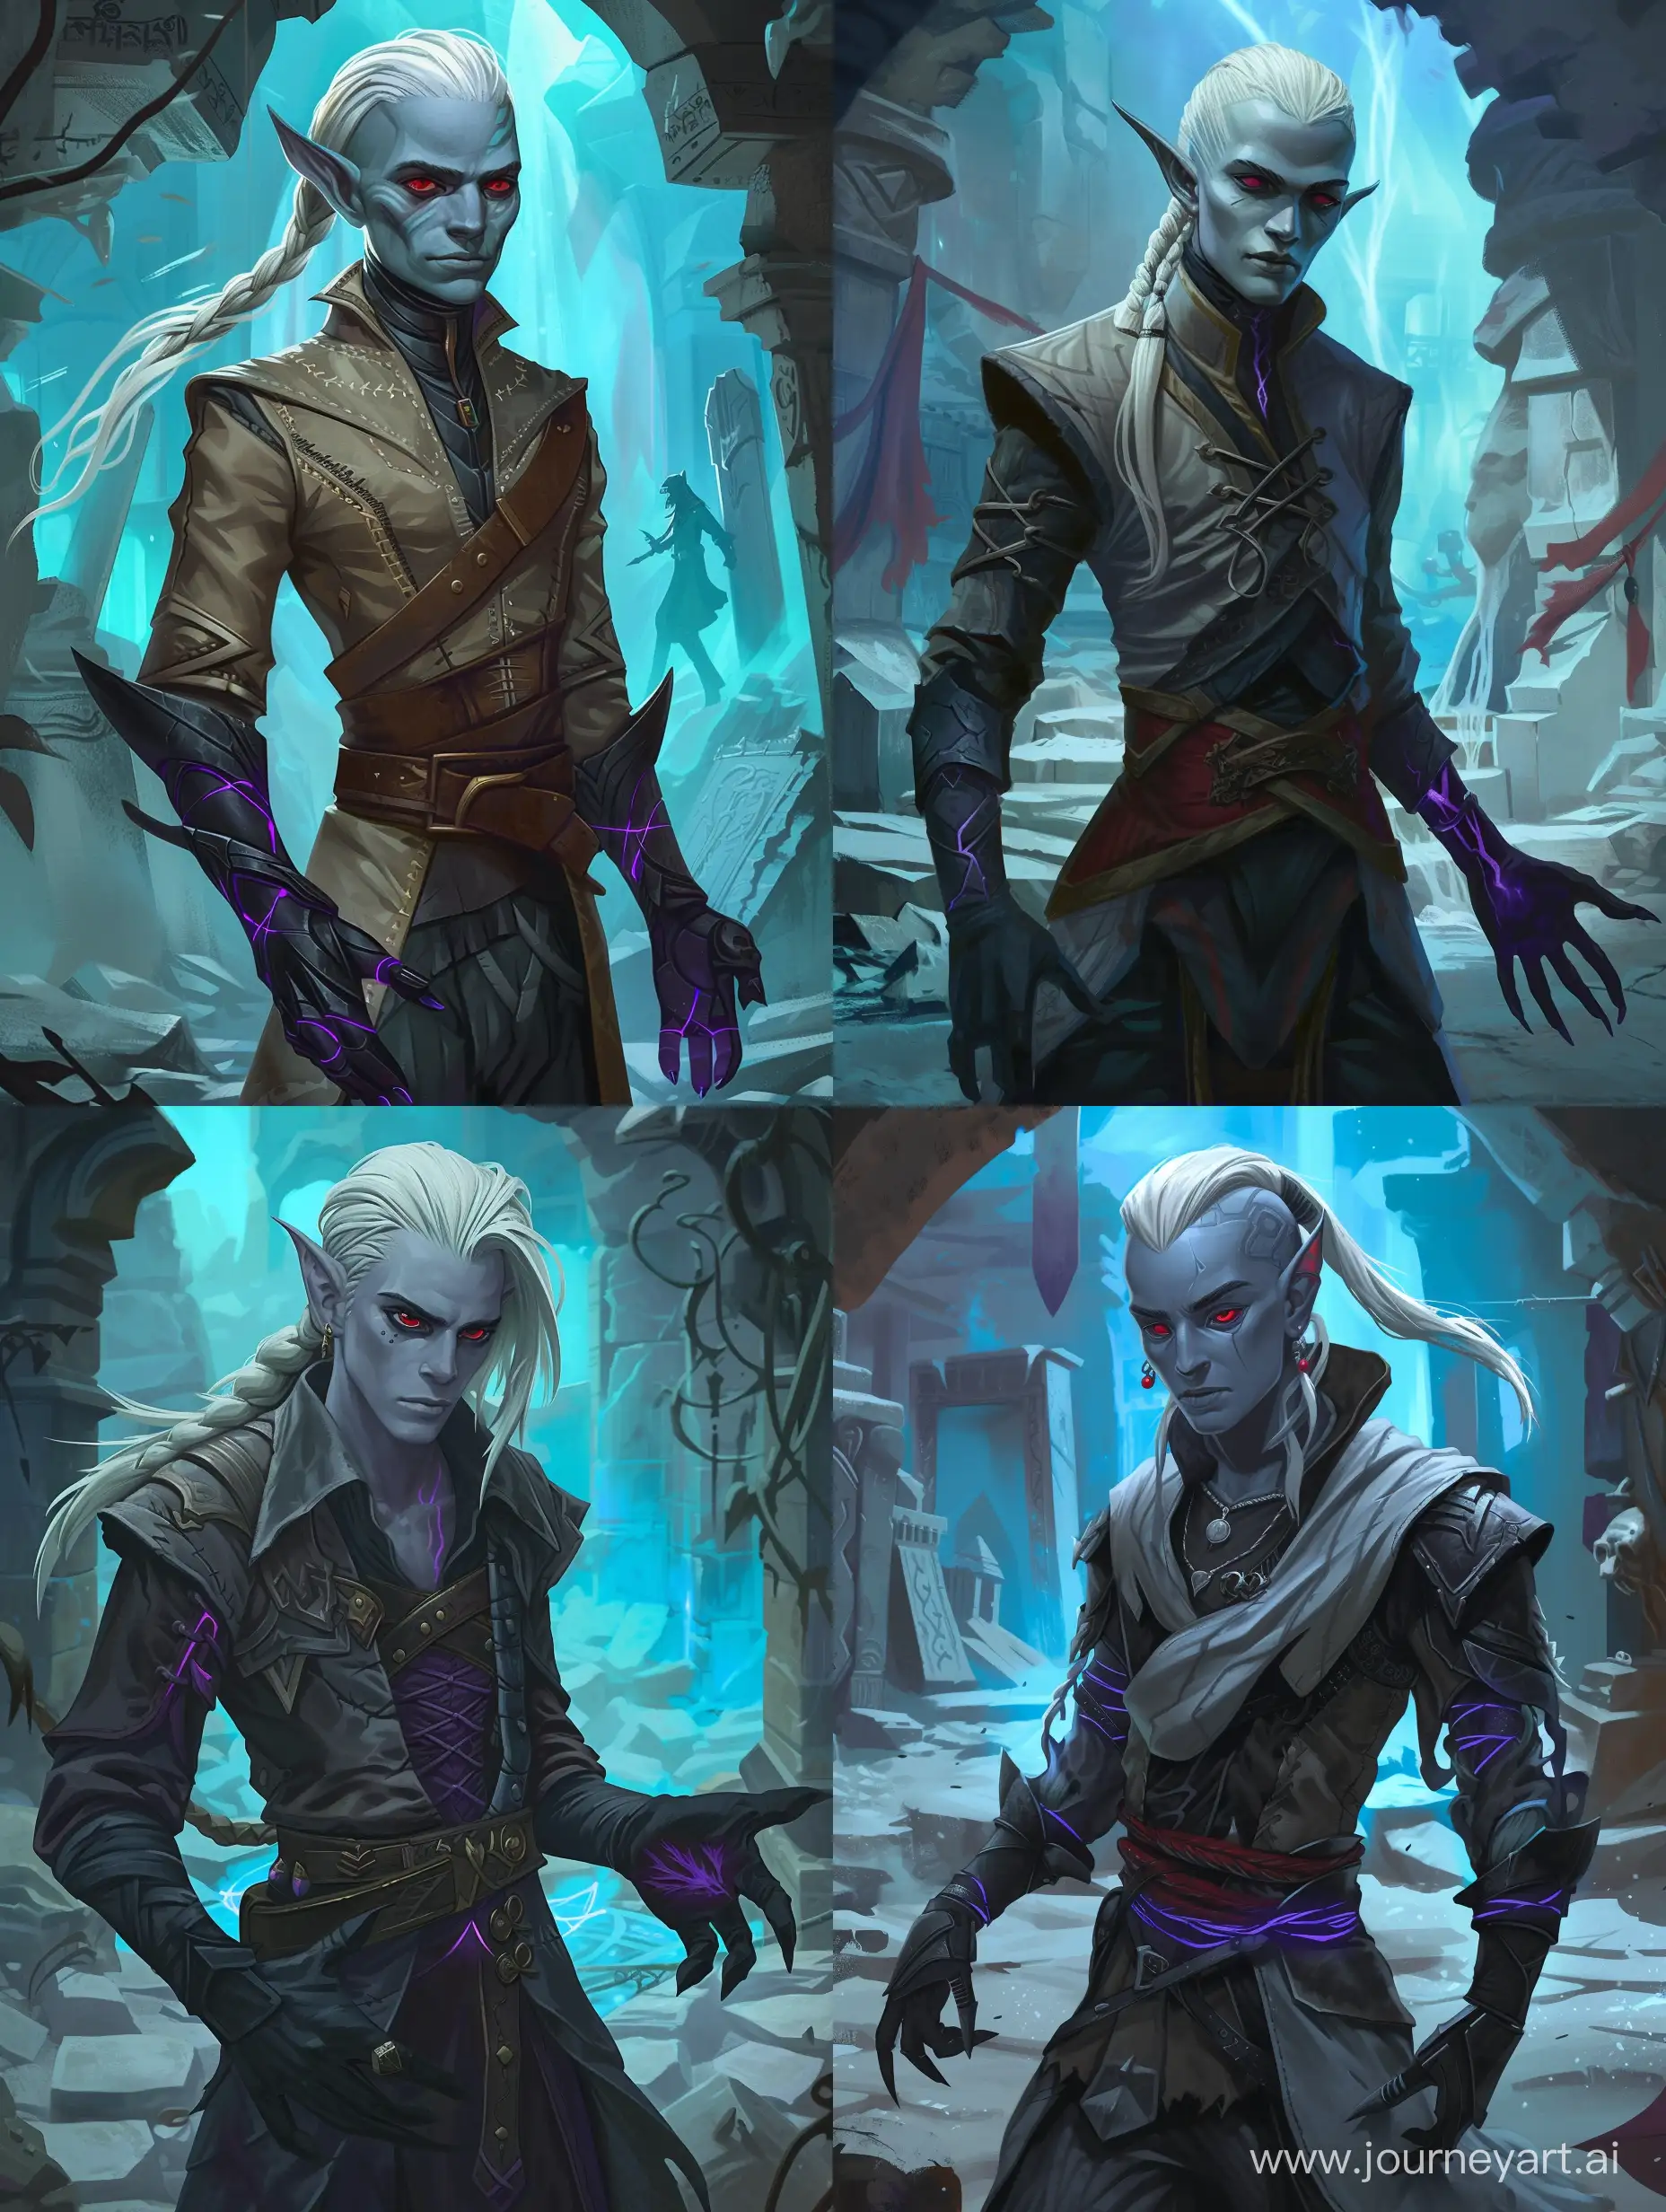 Calm-Young-Drow-Rogue-in-Assassin-Attire-Amid-Underground-Temple-Ruins